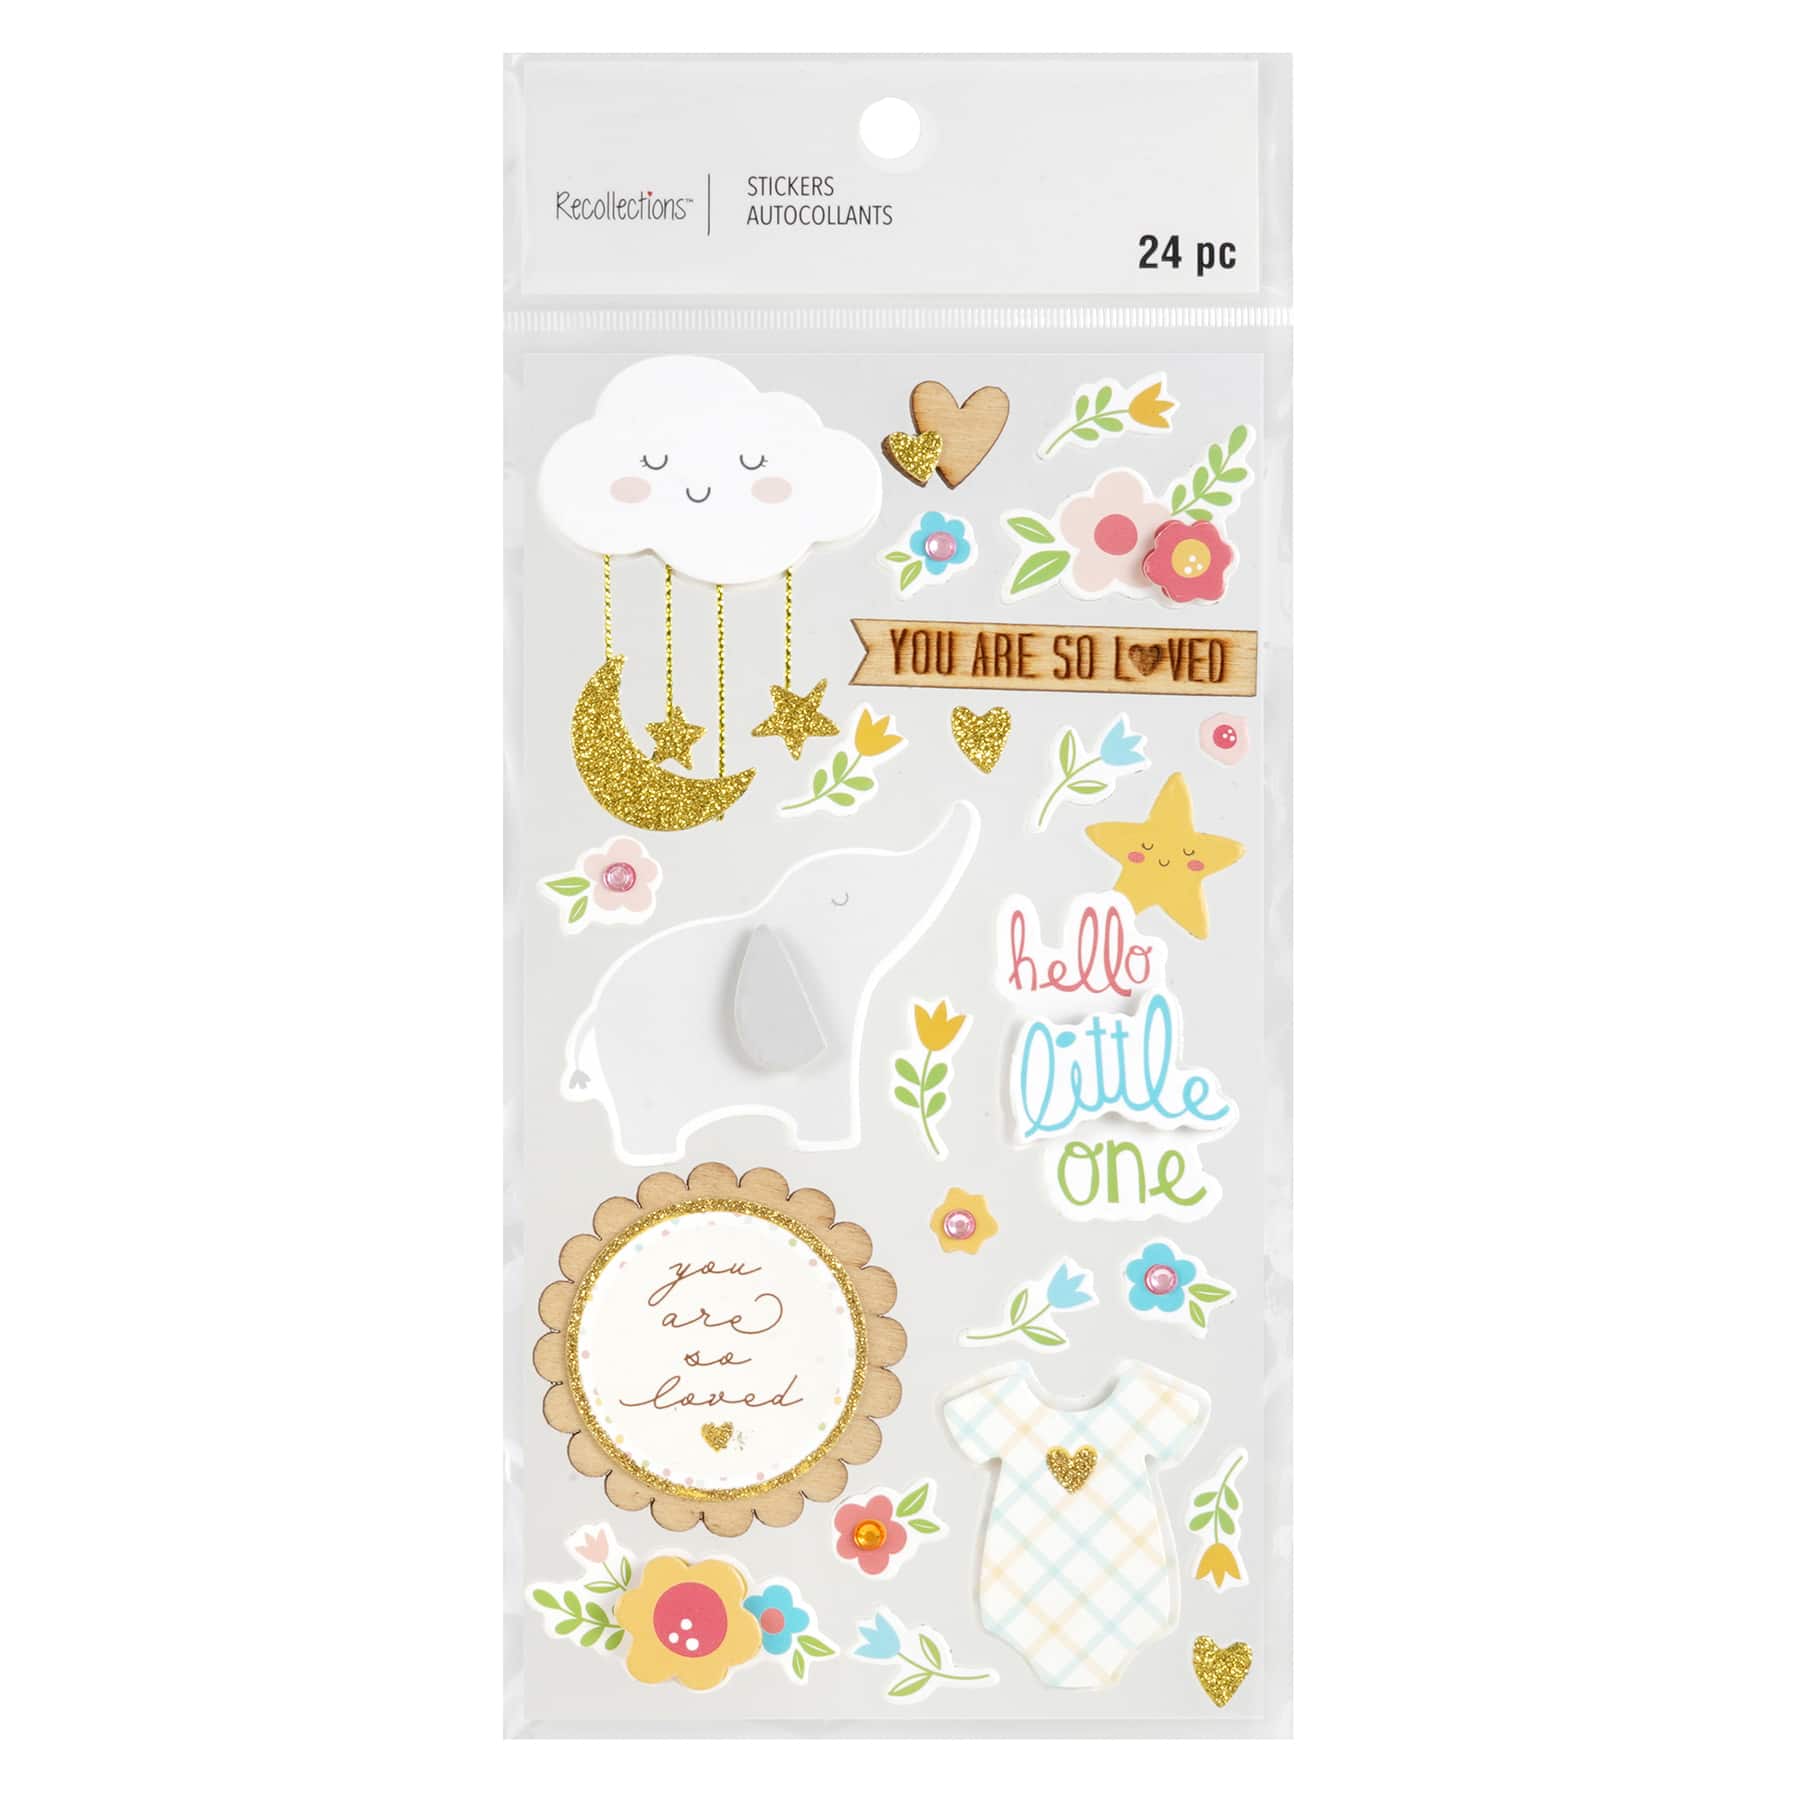 Gold Glitter Star Stickers by Recollections™